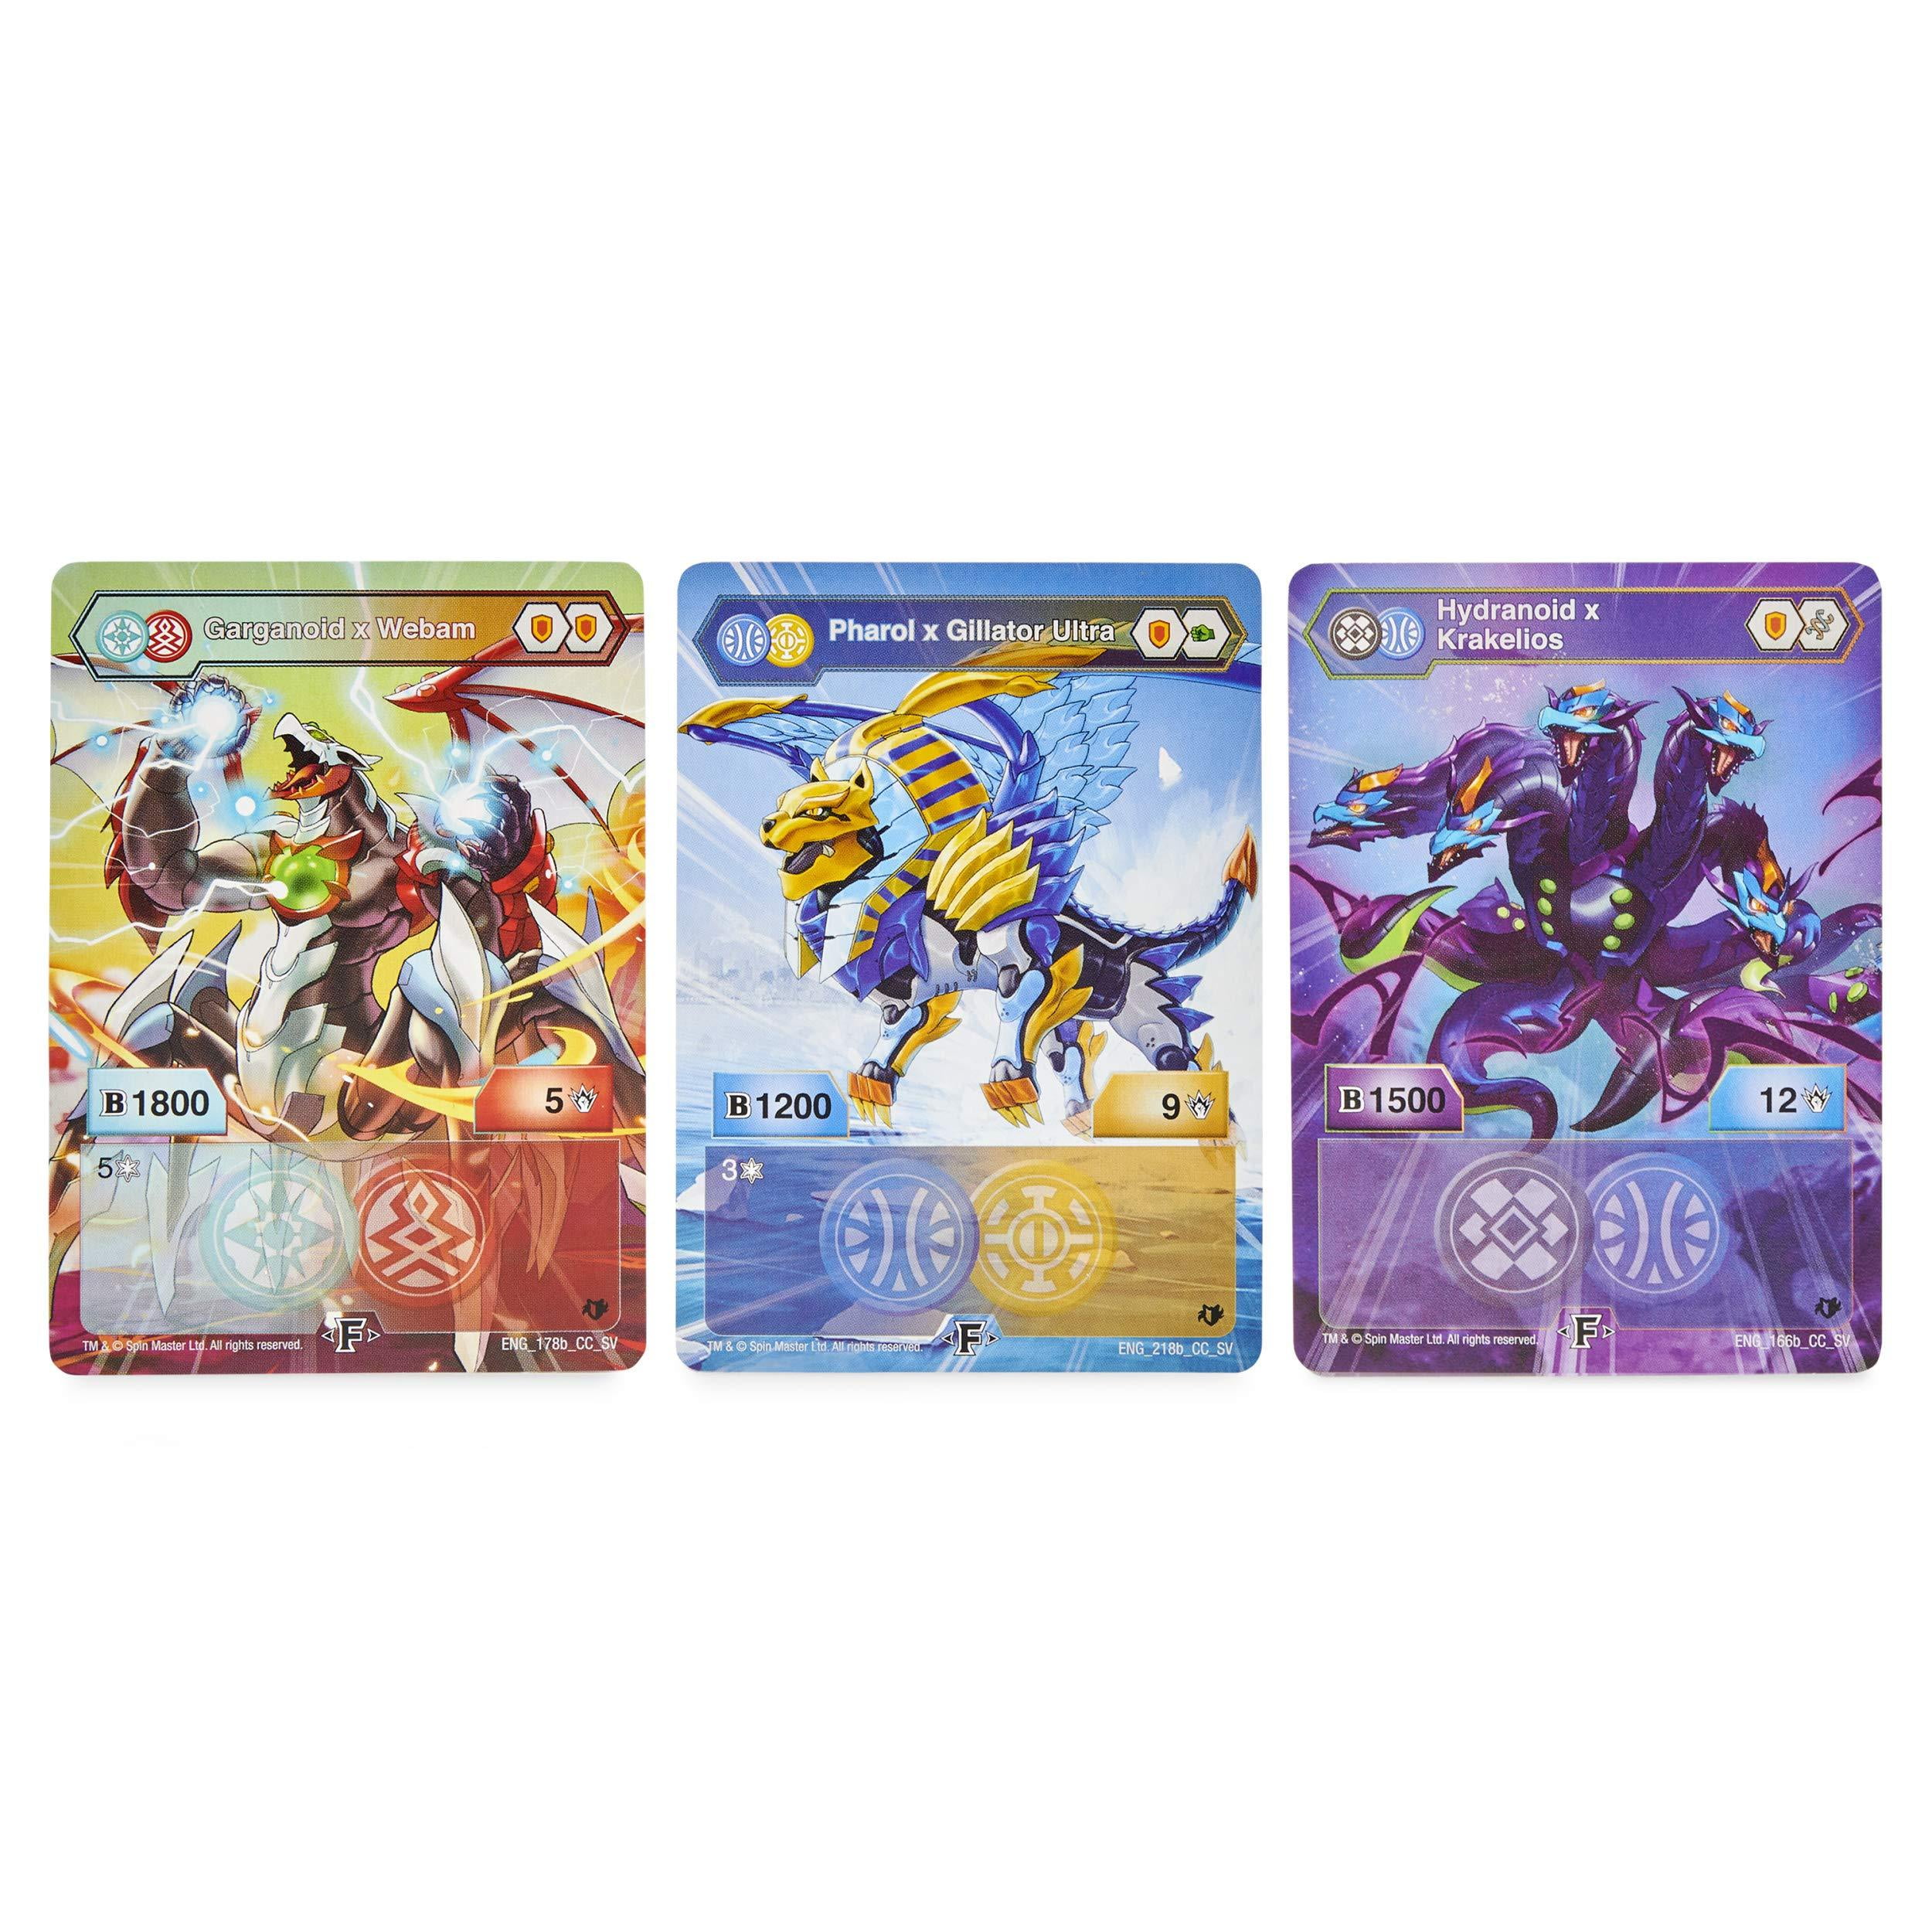 Bakugan Starter Pack 3-Pack, Fused Pharol x Gillator Ultra, Armored  Alliance Collectible Action Figures